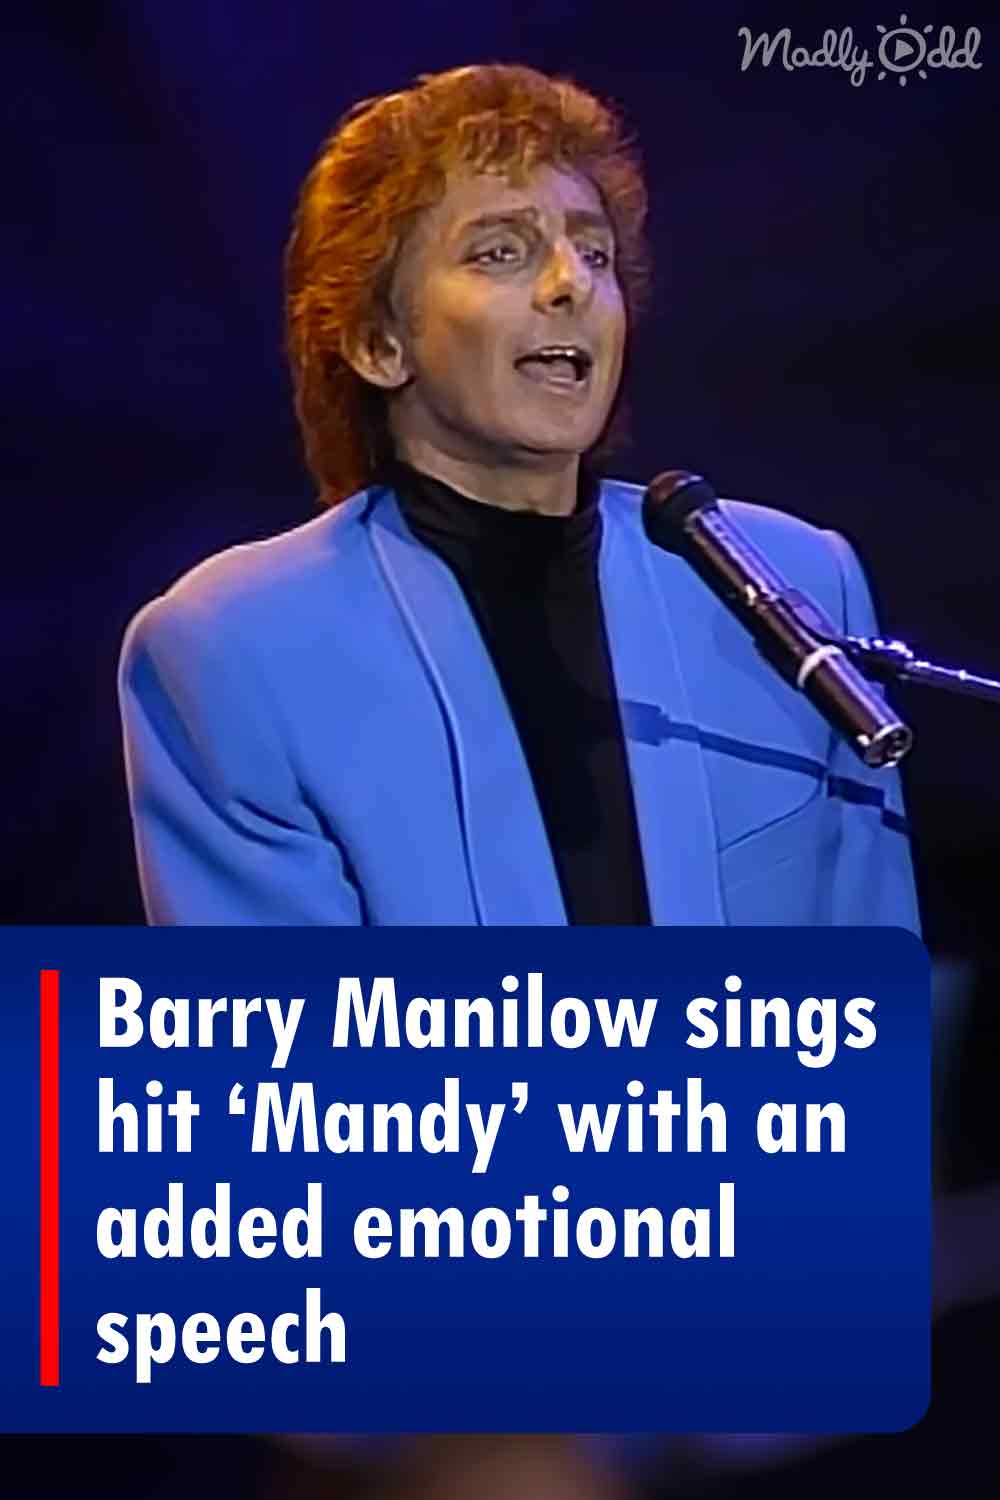 Barry Manilow sings hit ‘Mandy’ with an added emotional speech